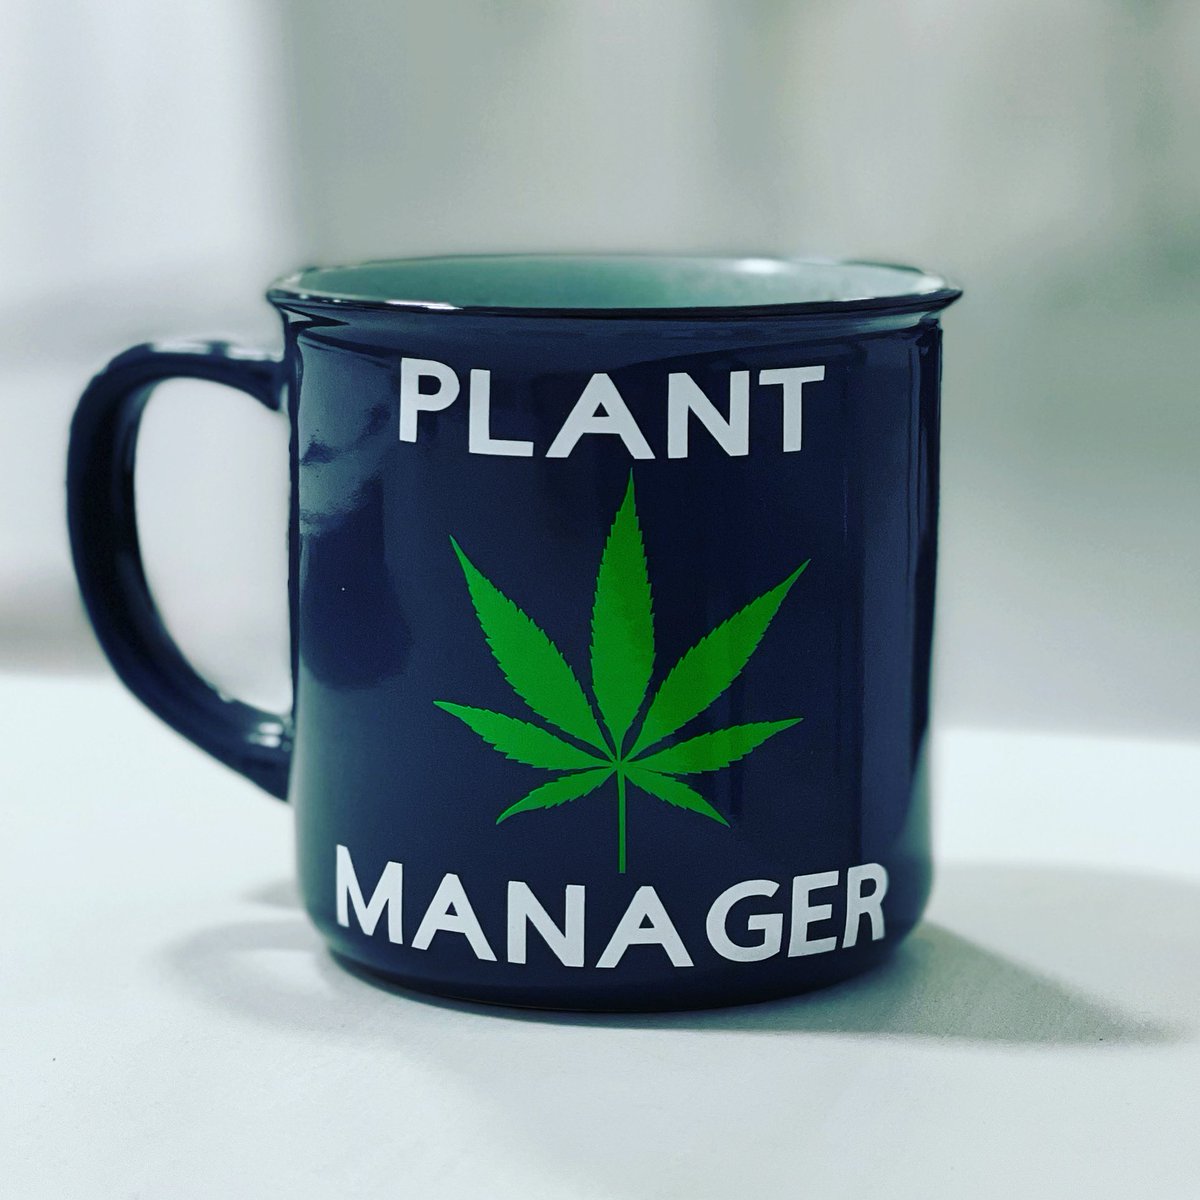 No days off. ☕️ #PlantManager